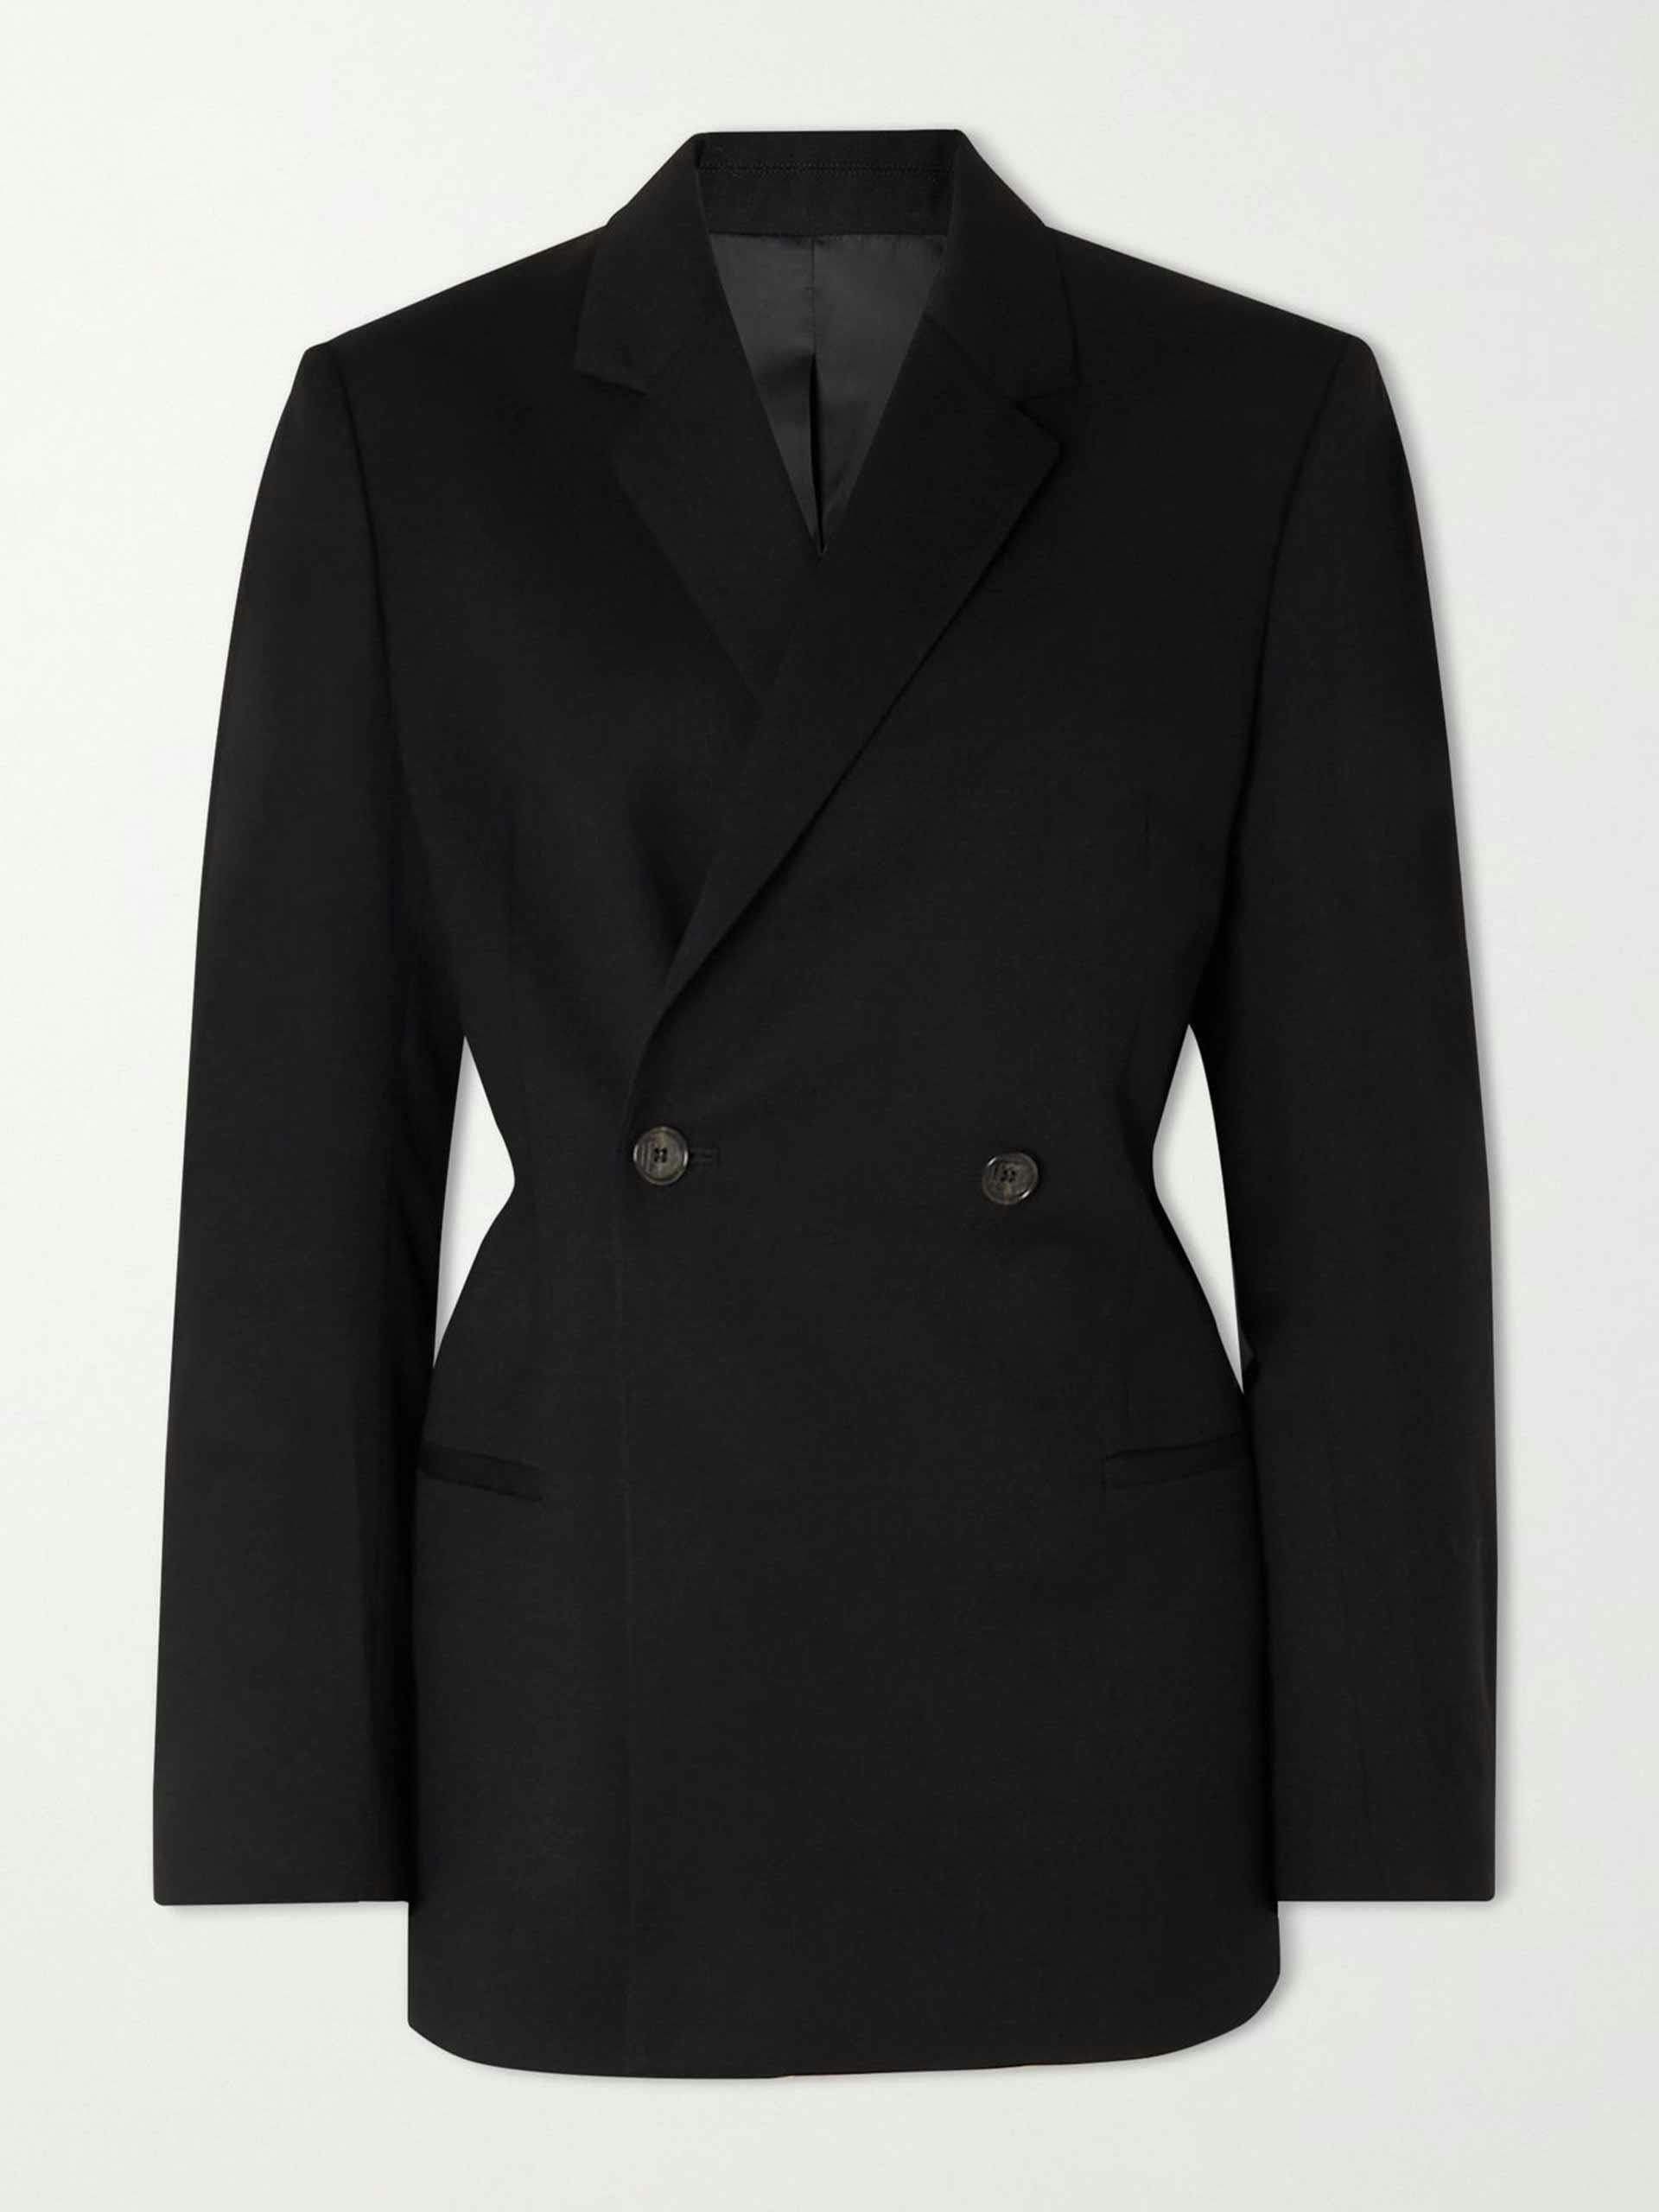 Double-breasted wool blazer